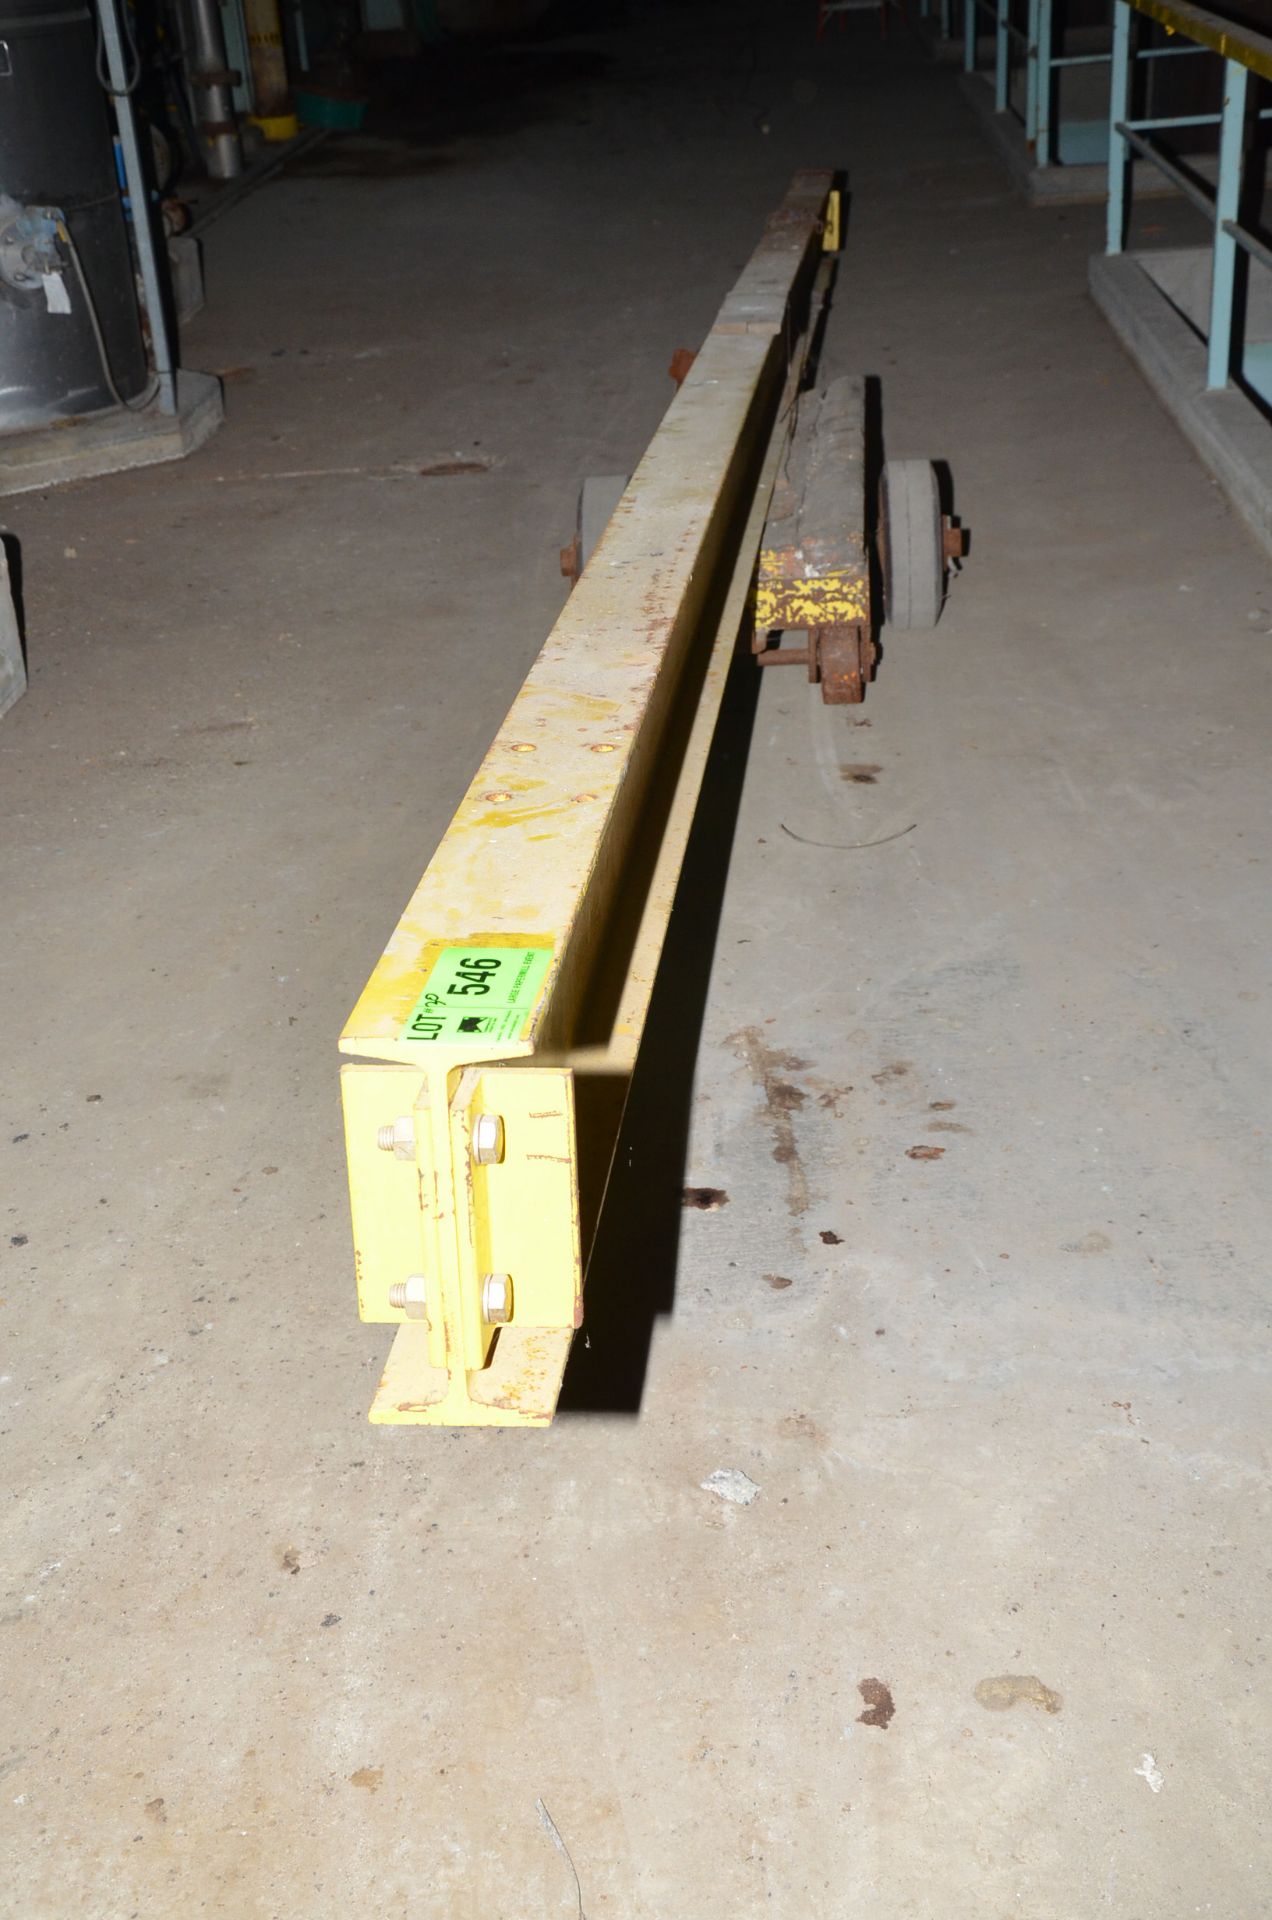 LOT/ 9,500 LBS CAPACITY CRANE I-BEAM WITH ROLLING CART [RIGGING FEES FOR LOT #546 - $175 USD PLUS